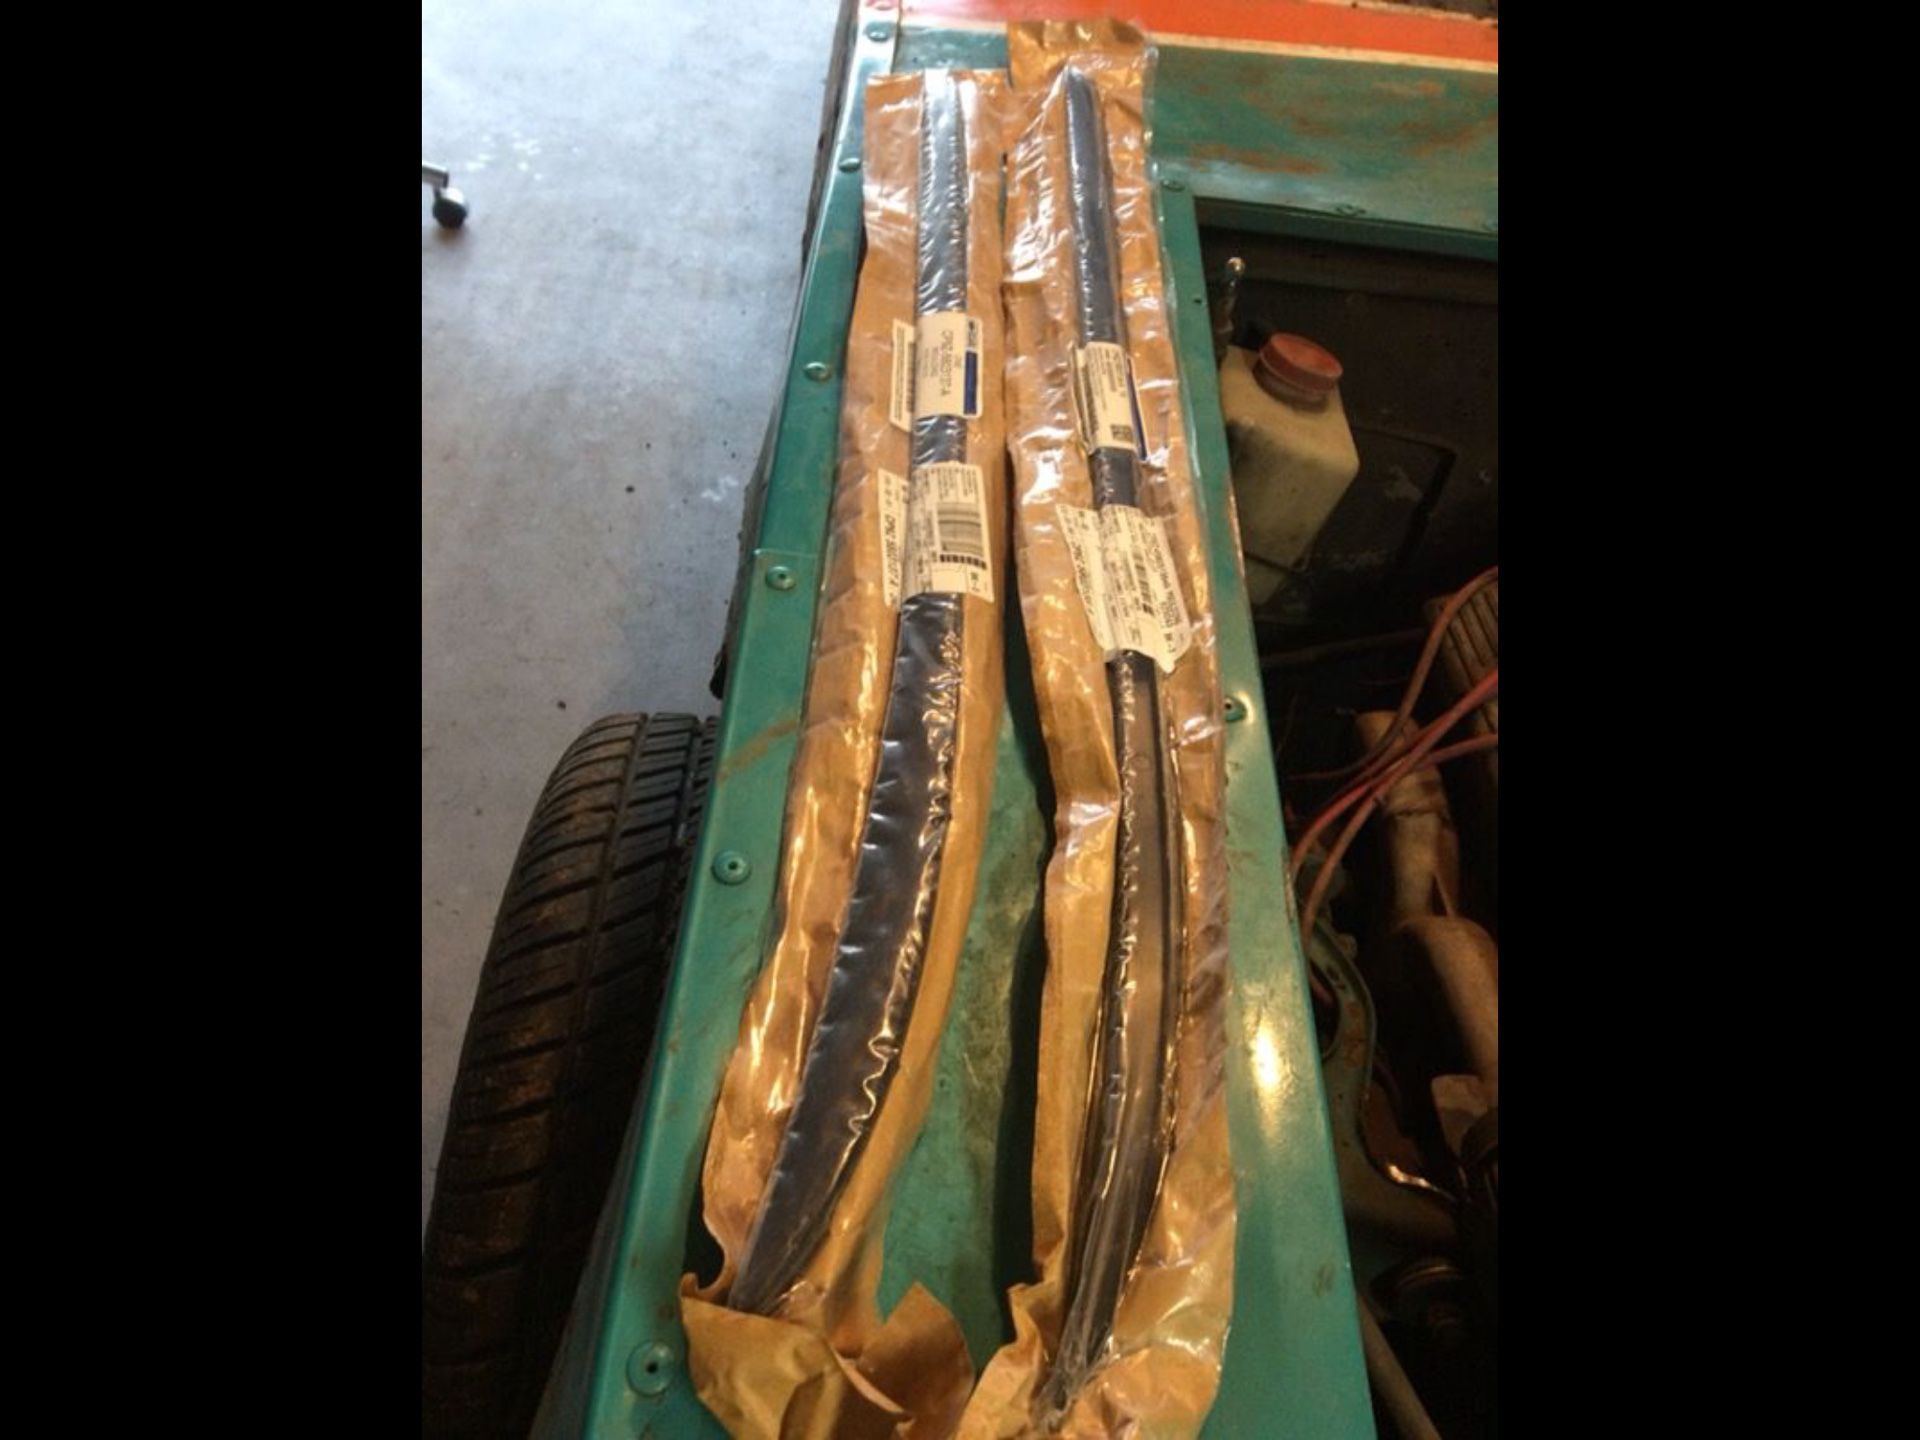 Ford Focus Windshield Piller Molding New in Package $20.00 for the pair